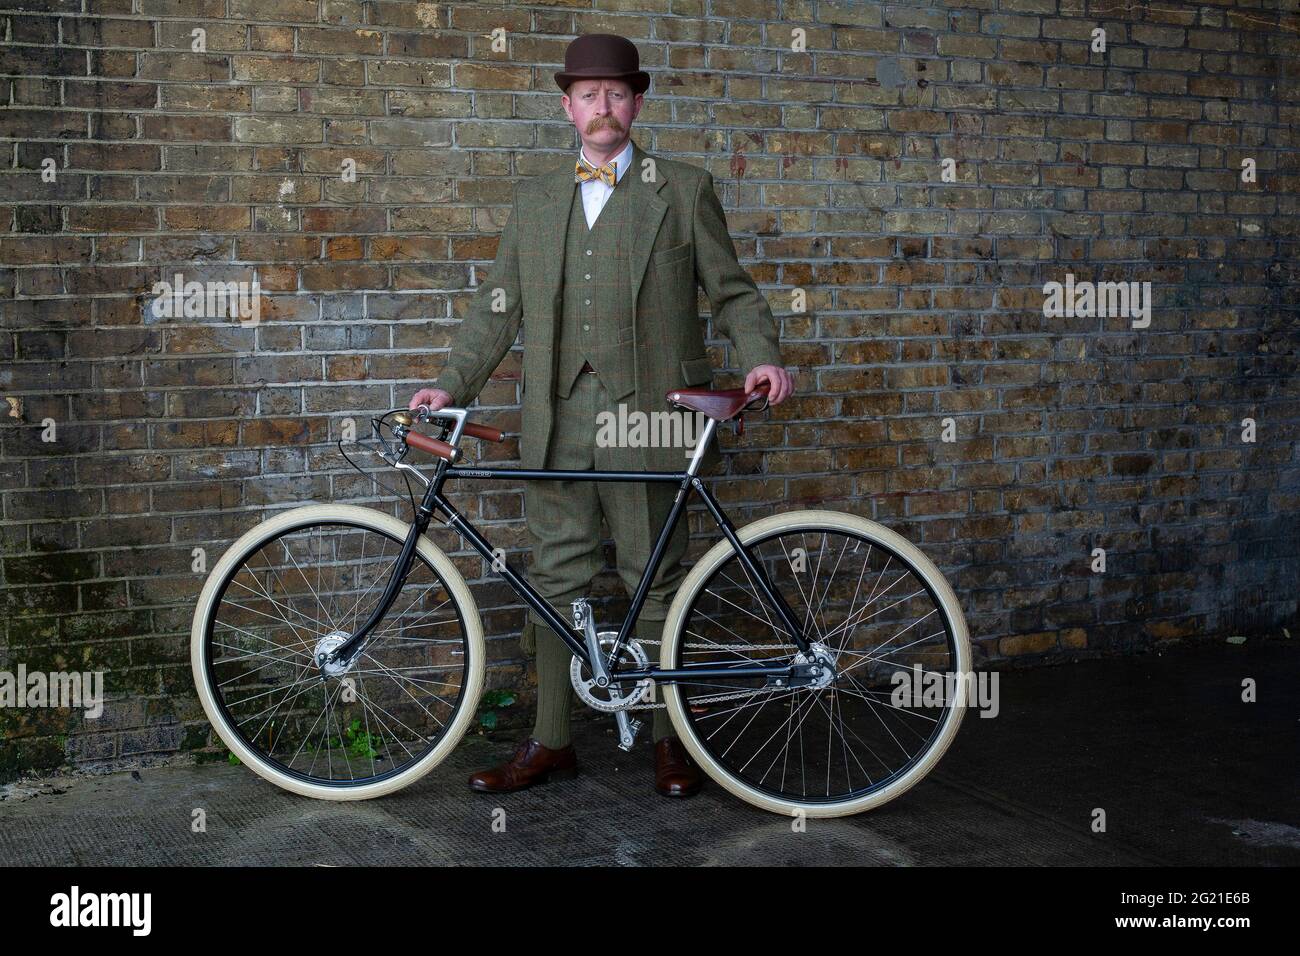 London a elegant man standing beside Pashley Guvnor bike wearing suit with bowler hat and bow tie . Stock Photo